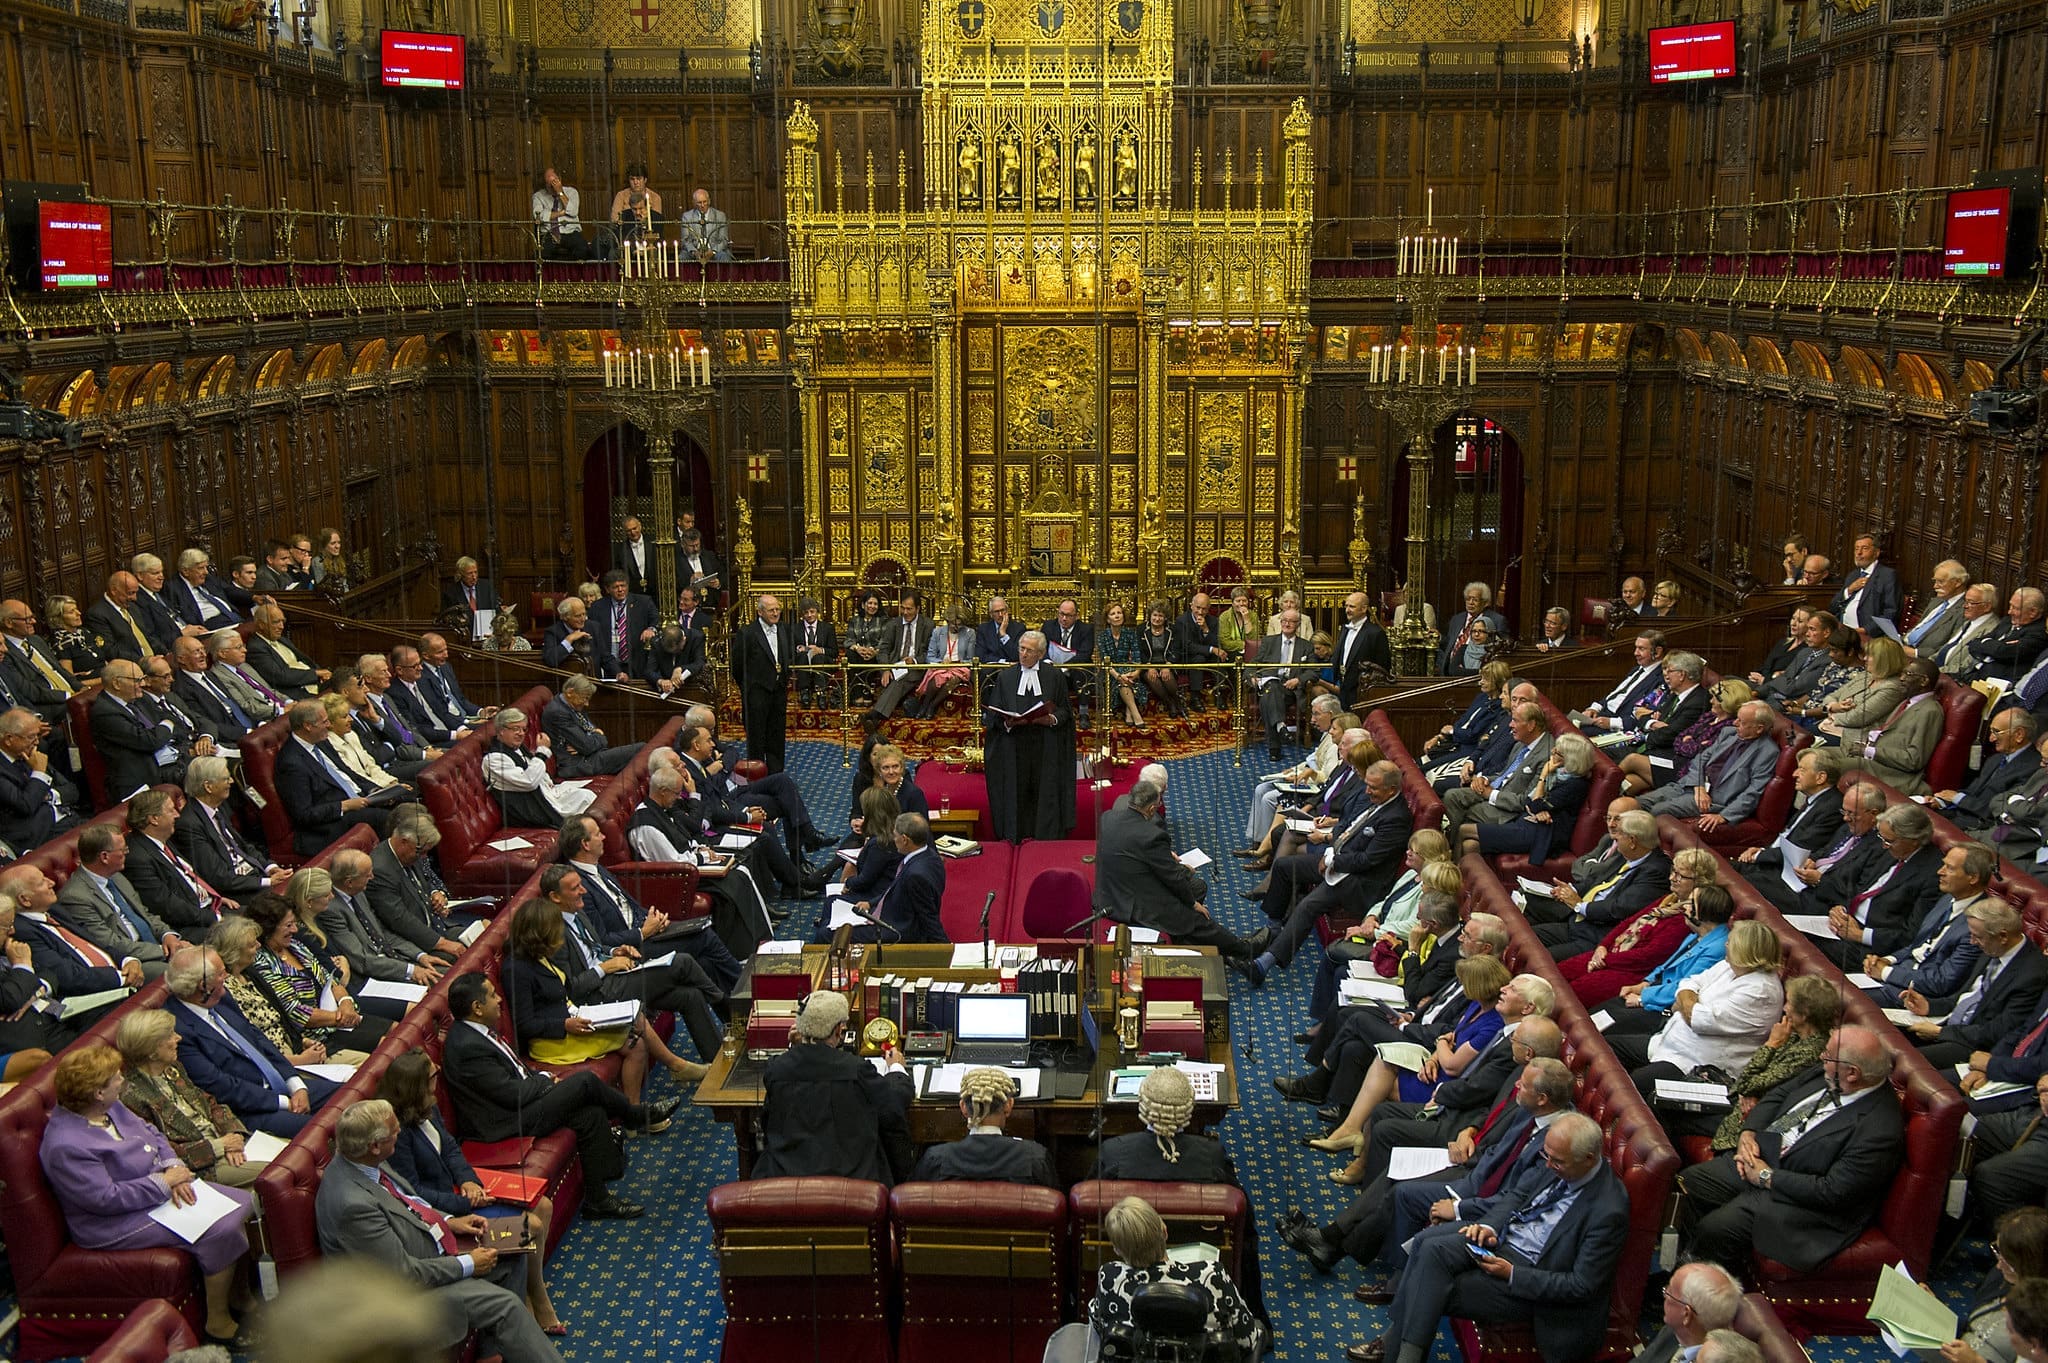 Party over Principle: Independence in the Lords – Electoral Reform